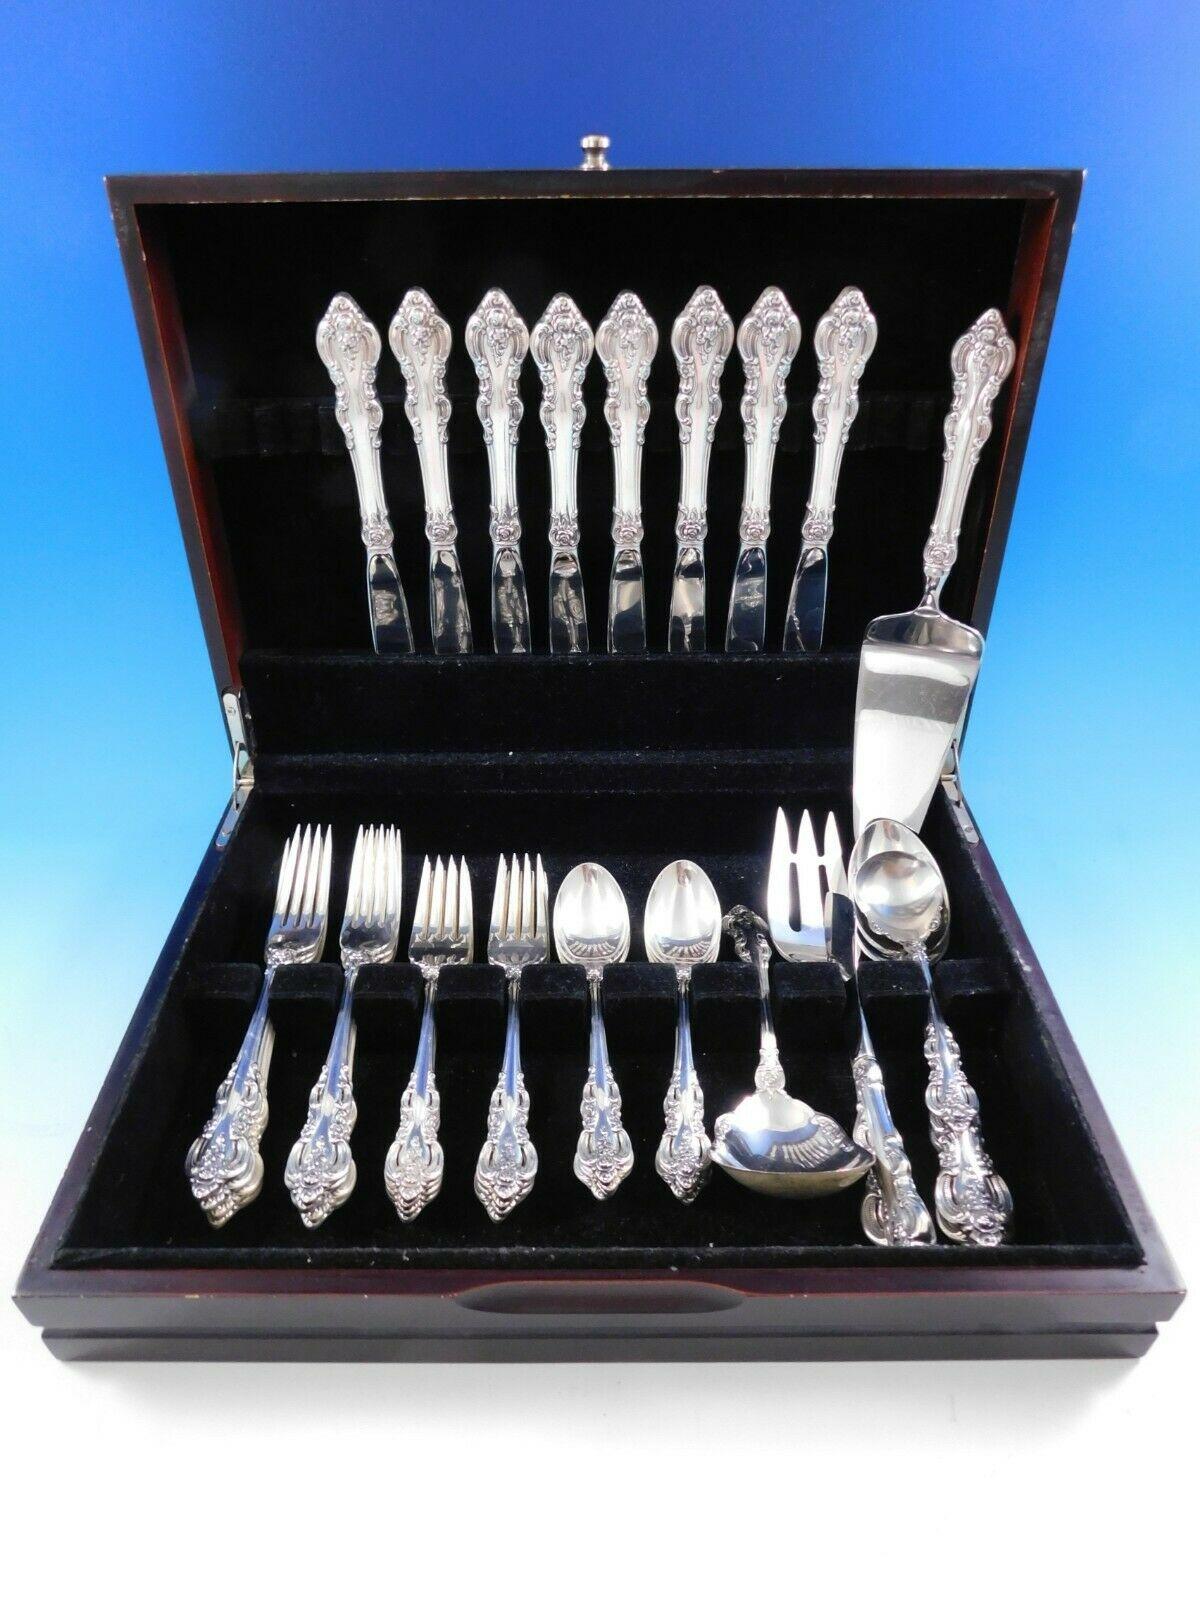 El Grandee by Towle sterling silver flatware set, 39 pieces. This set includes:

8 knives, 9